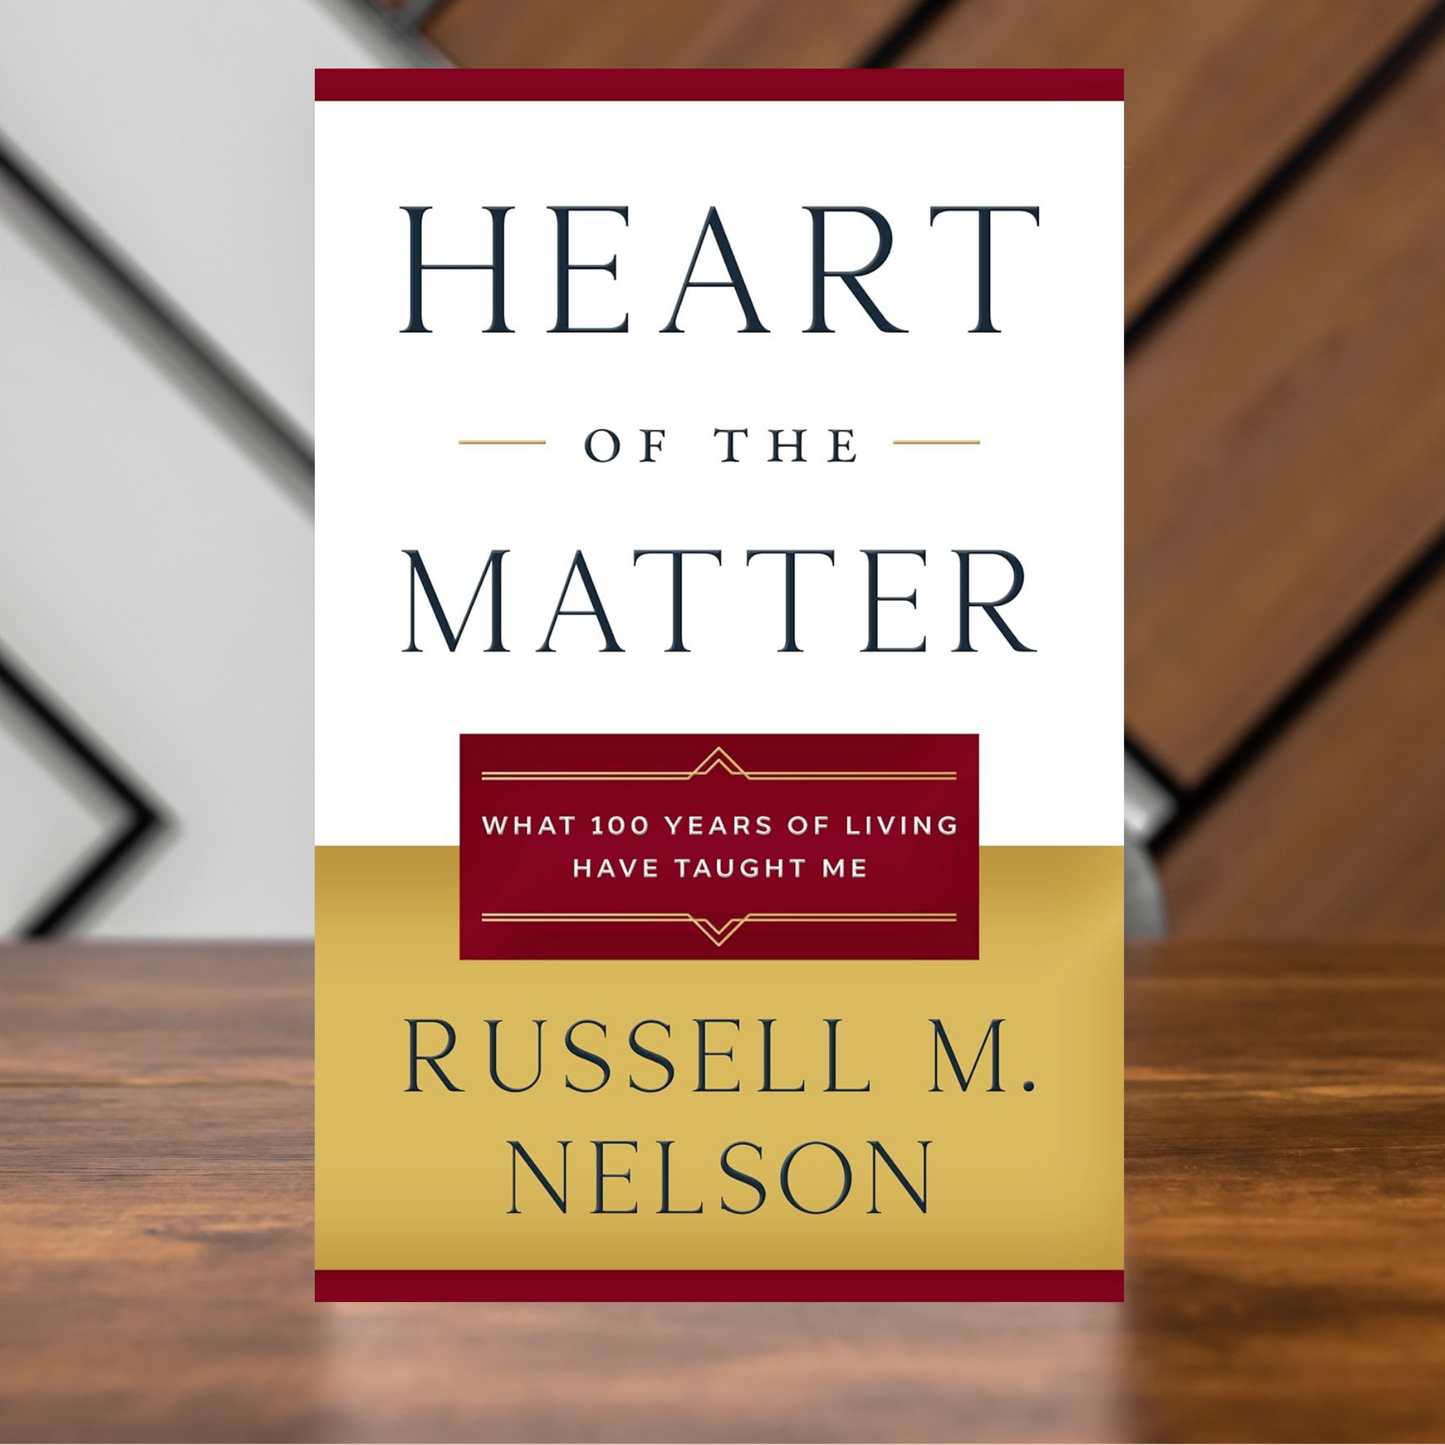 Heart of the Matter book by Russell M. Nelson available on Nauvoo Supply Co